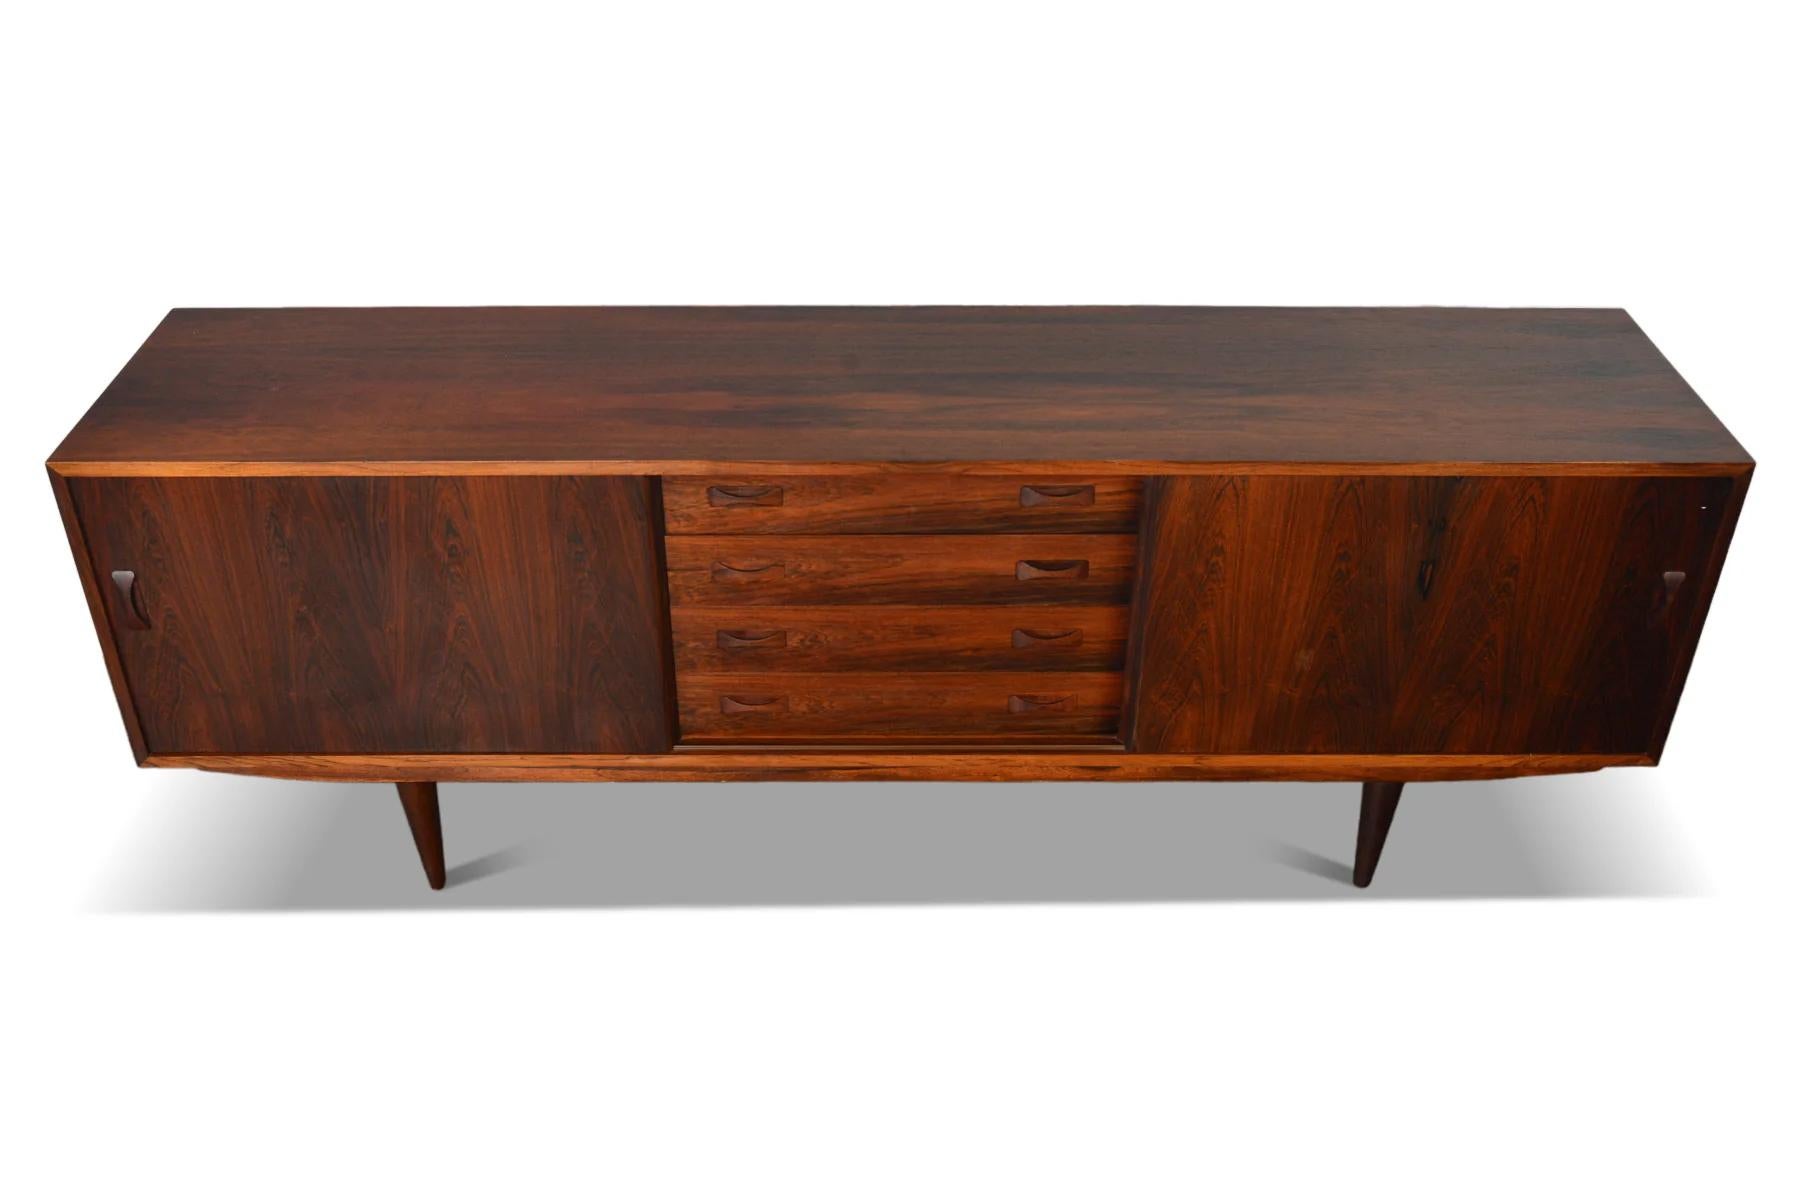 Large Danish Modern Credenza in Rosewood by Clausen + Søn In Excellent Condition For Sale In Berkeley, CA